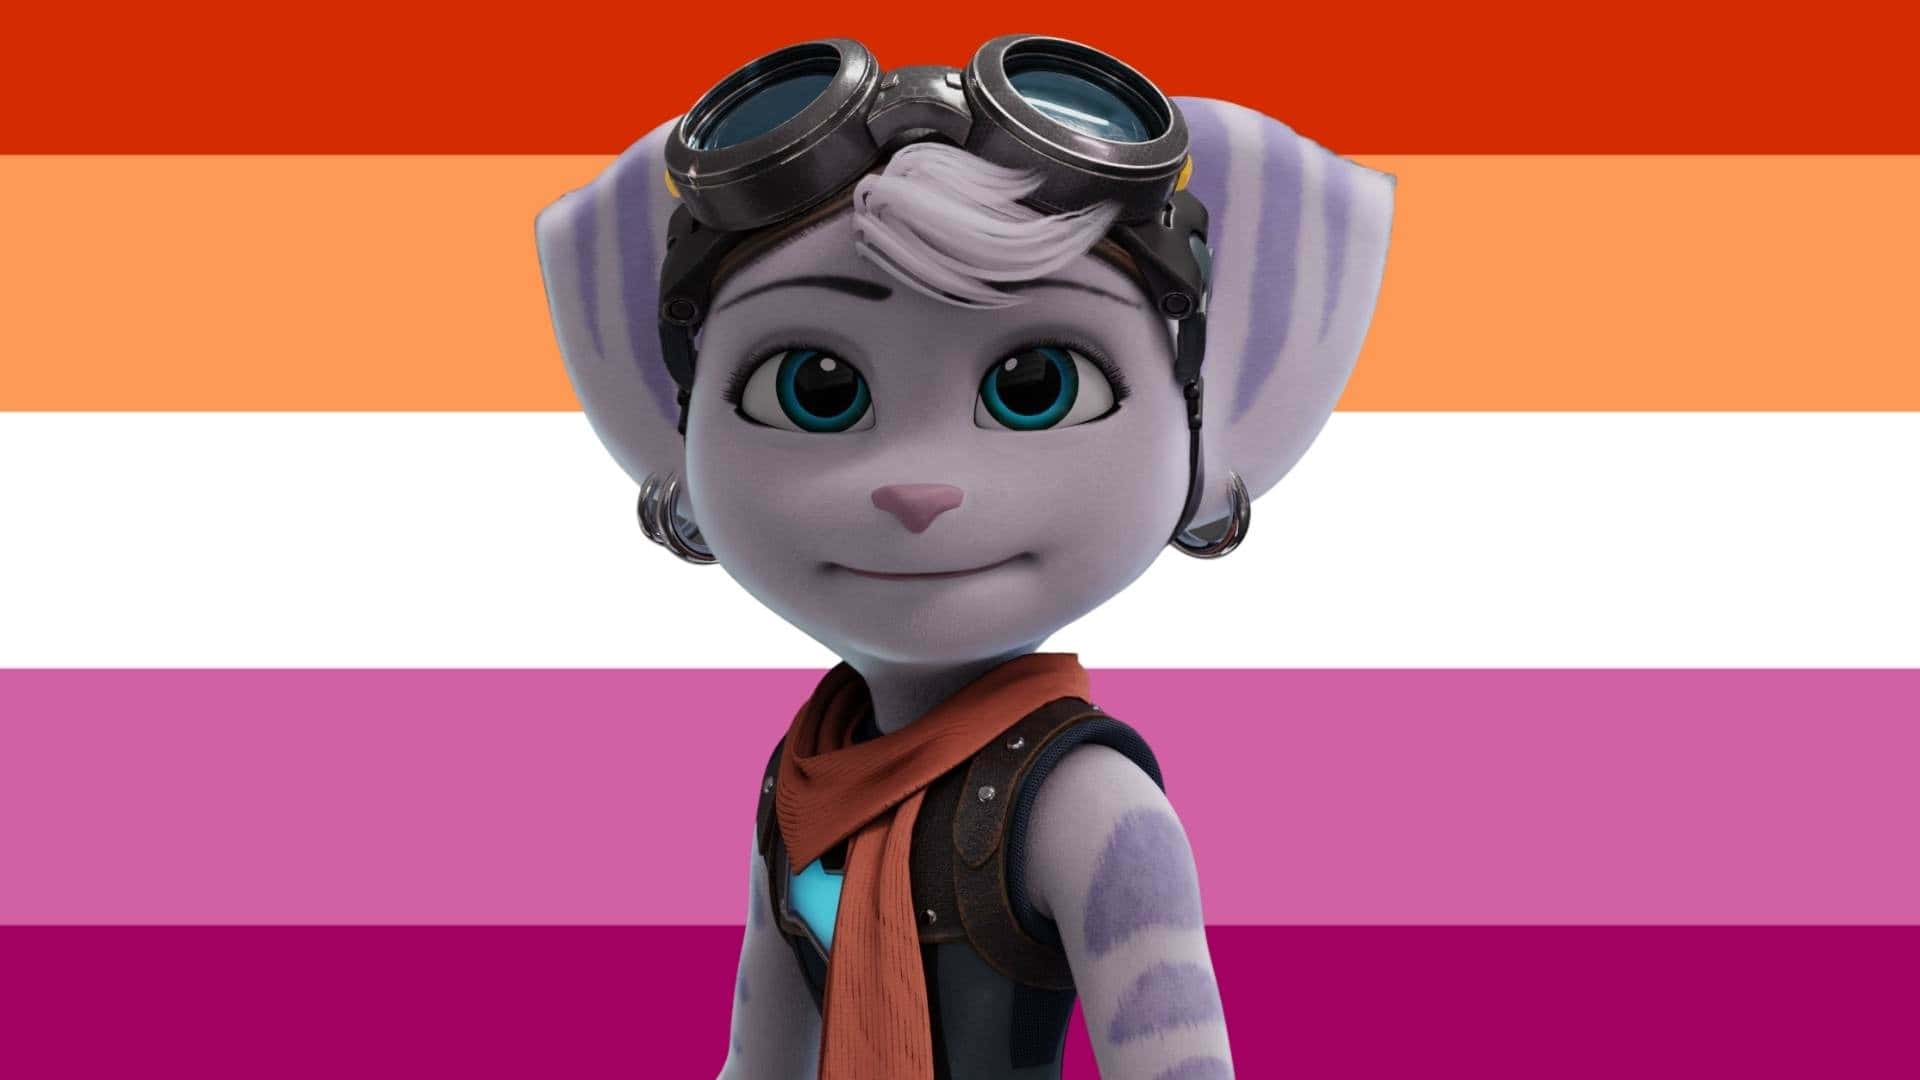 Ratchet and Clank writer confirms Rivet is a lesbian - Gayming Magazine